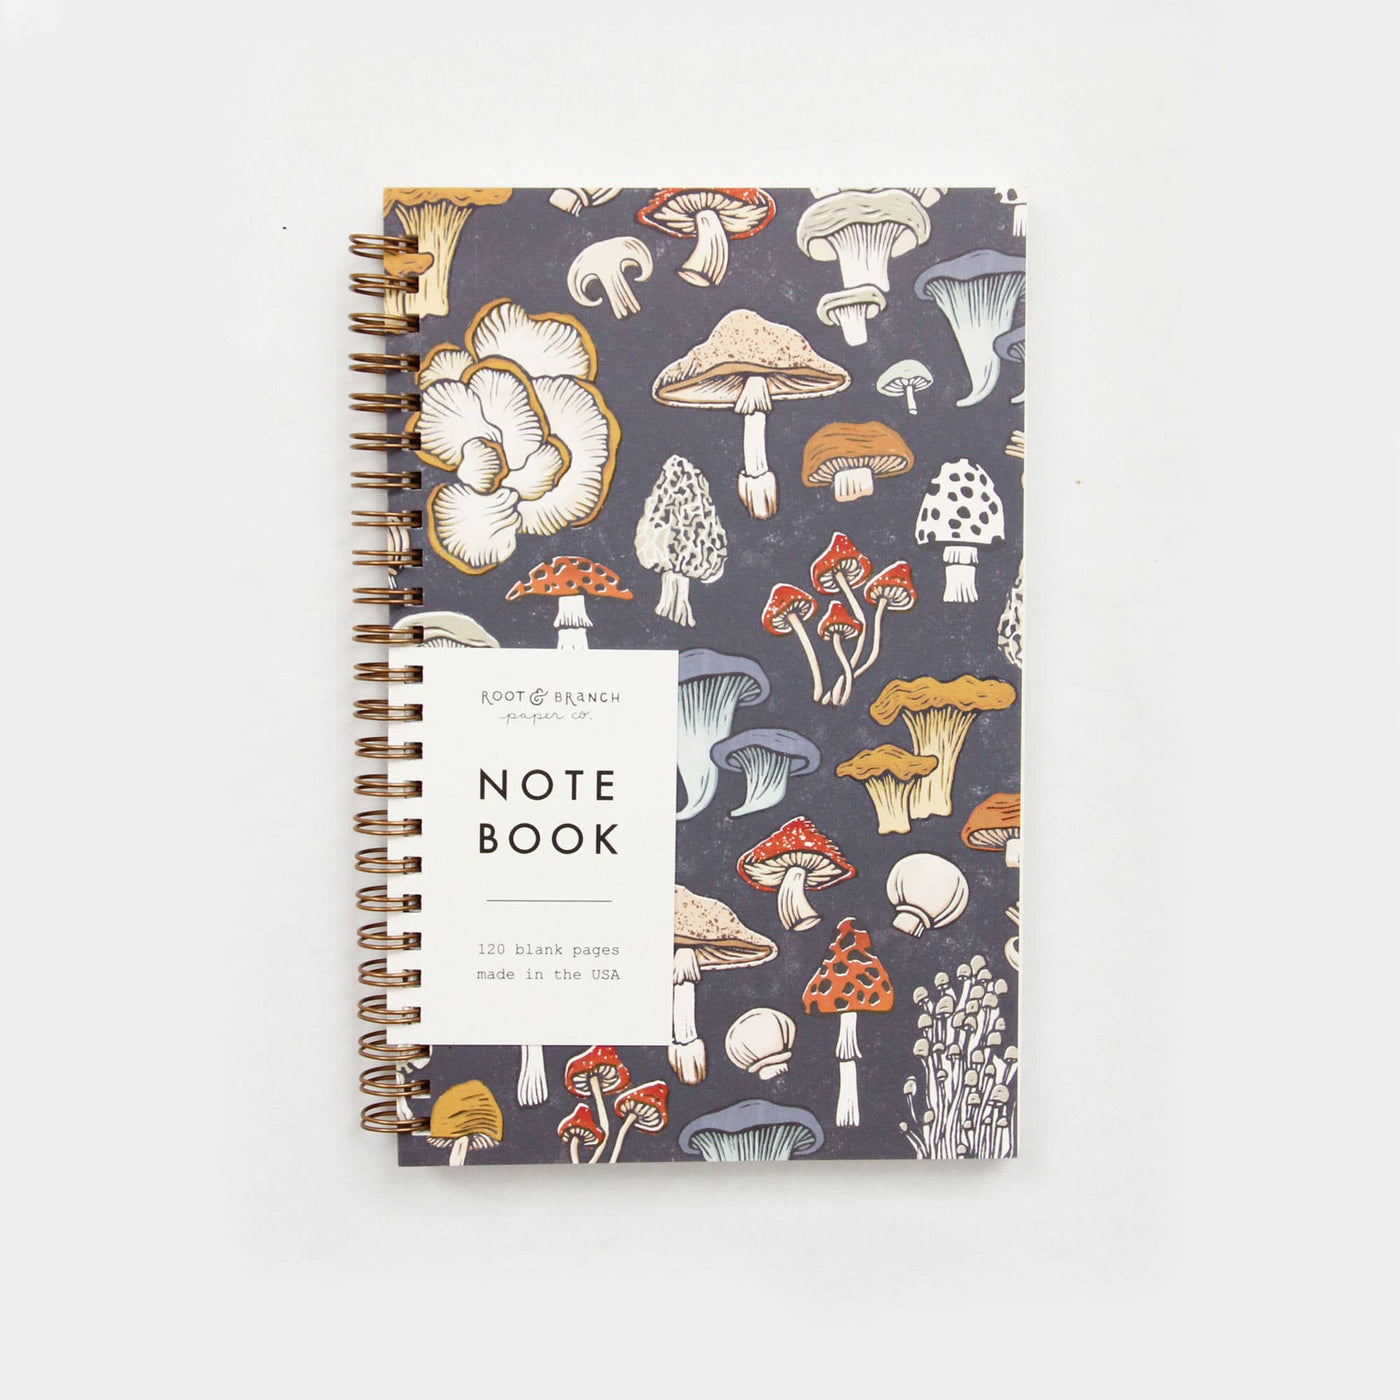 Root & Branch Paper Co. - Mushroom & Fungi Spiral Bound Notebook